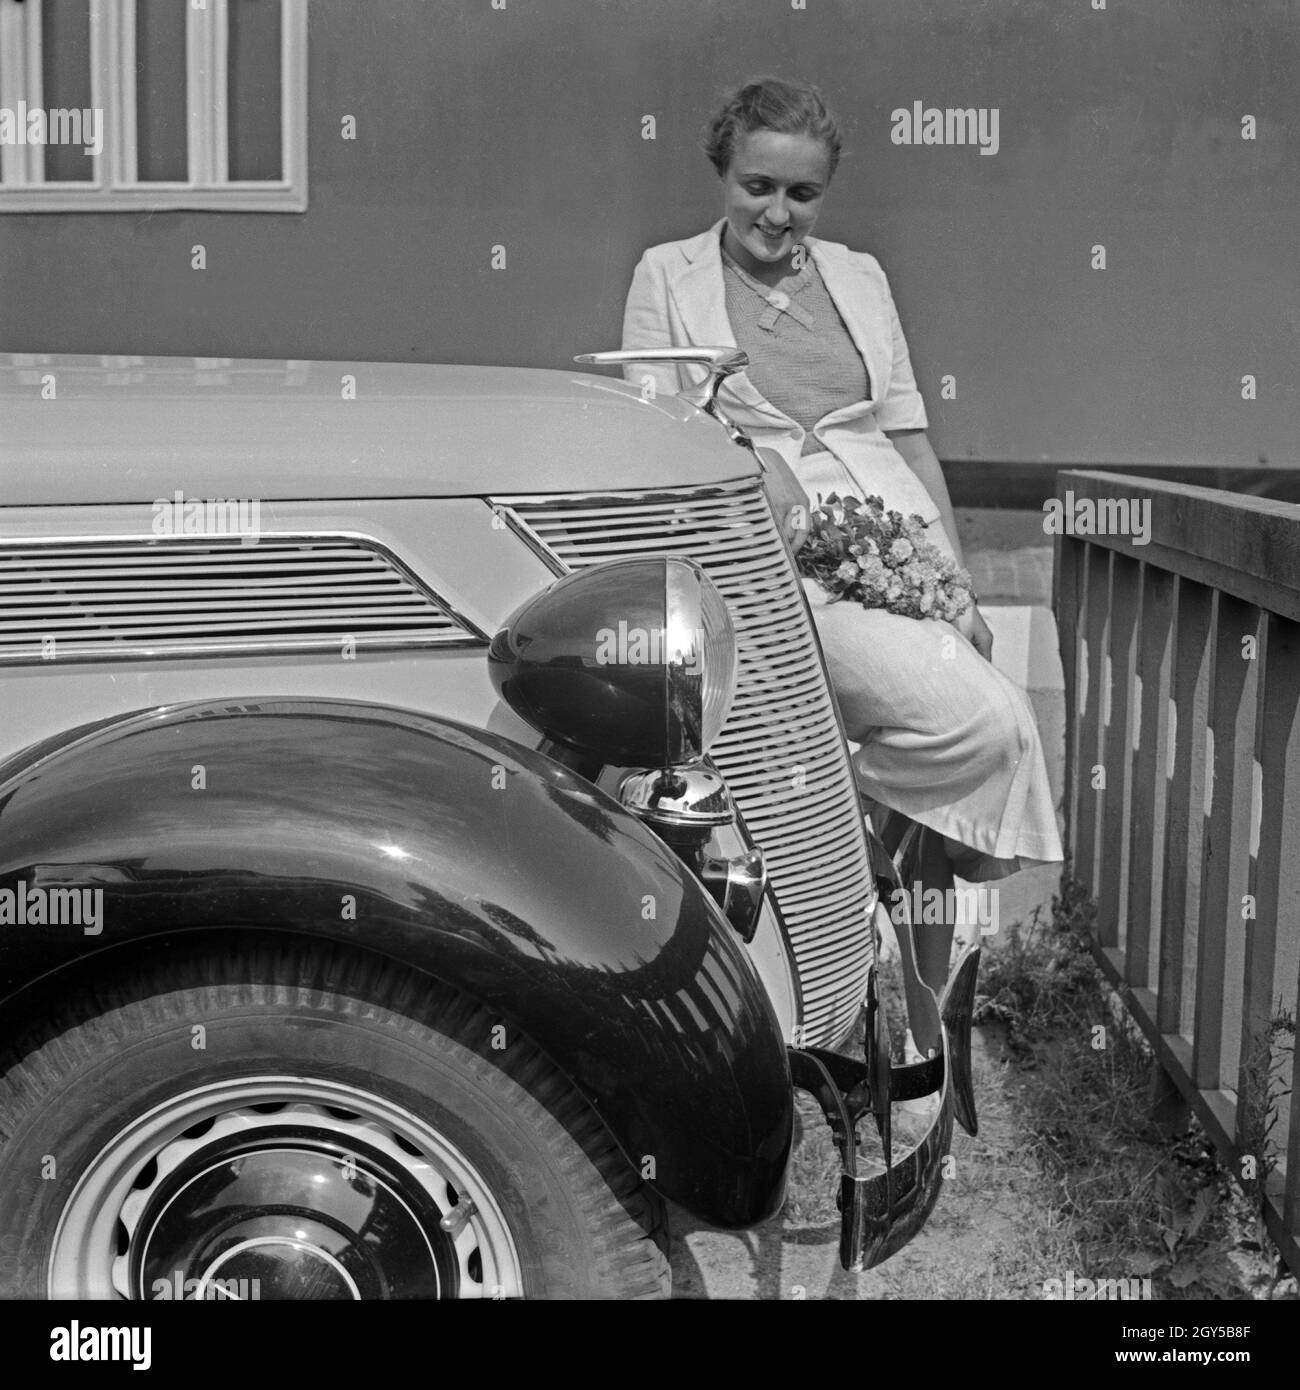 Automobile germany Black and White Stock Photos & Images - Alamy